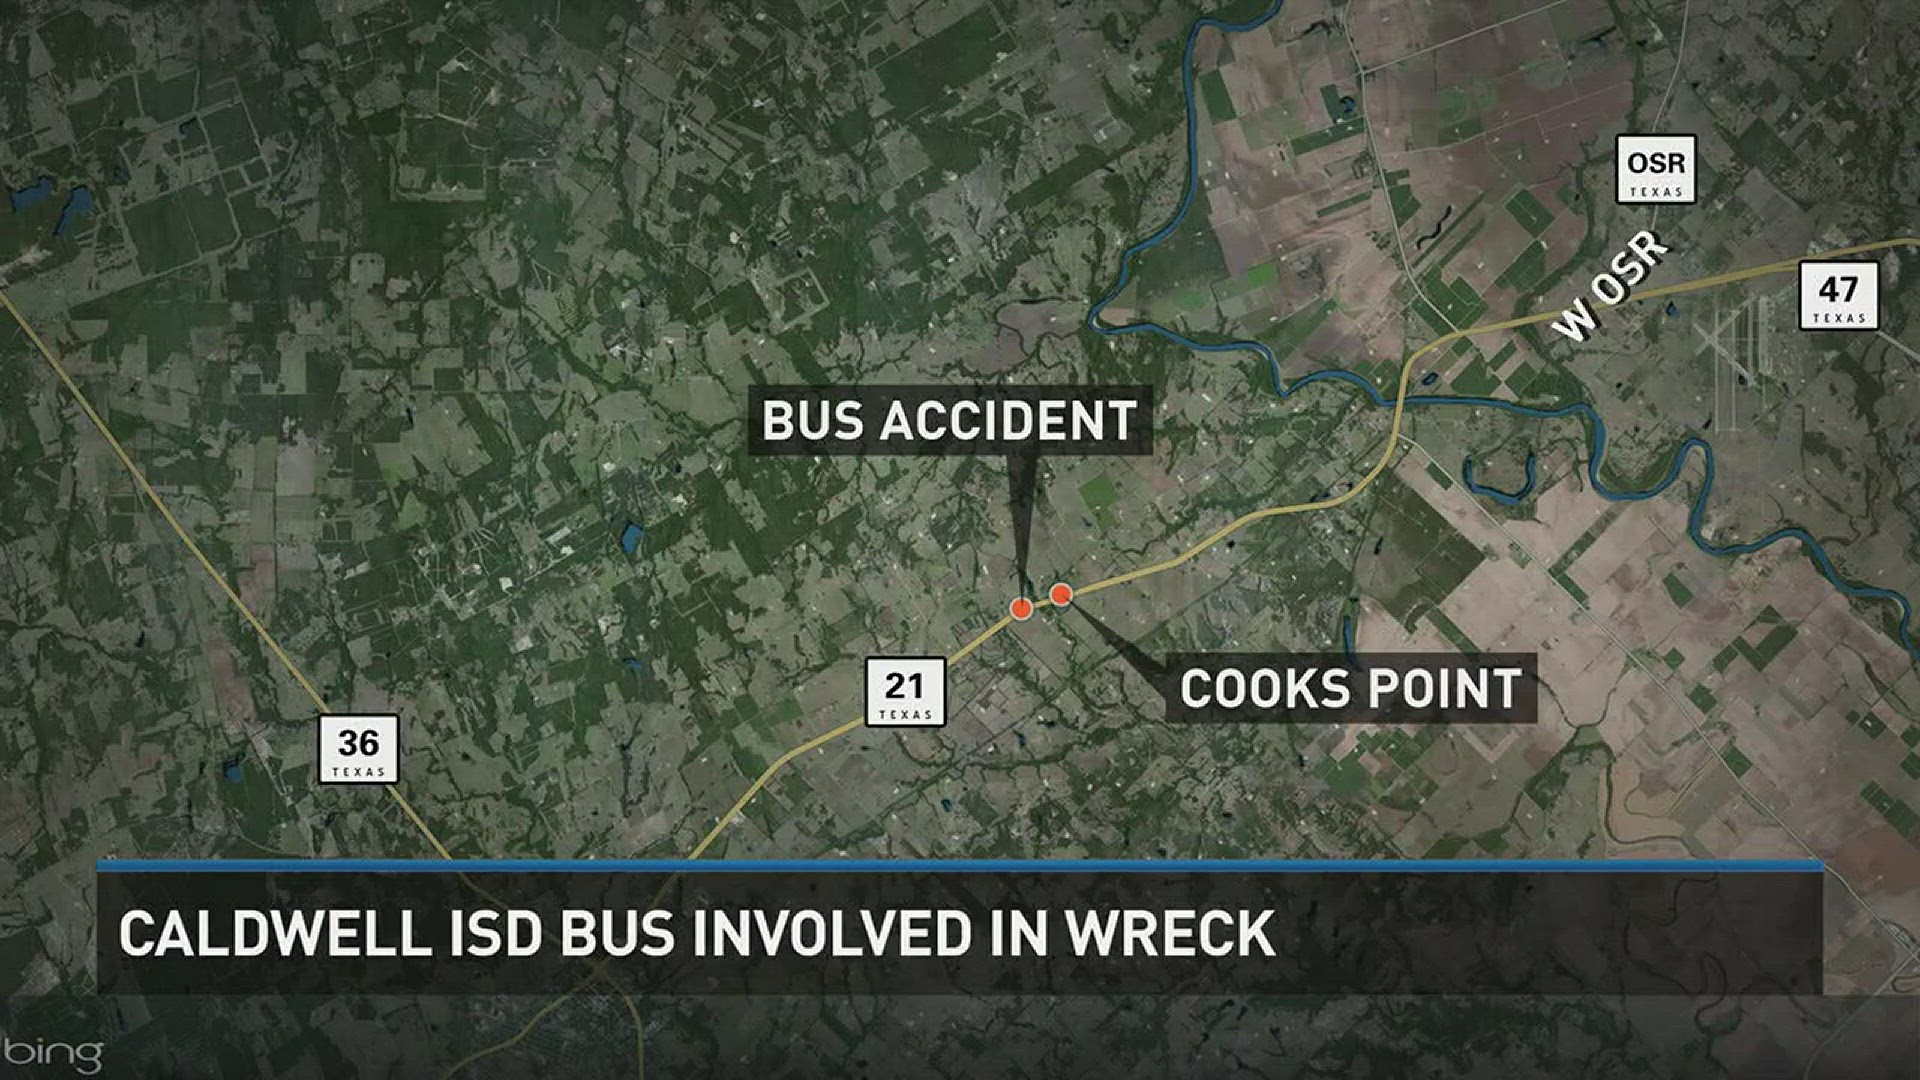 According to DPS a school bus was rear-ended by a pick-up truck on Hwy 21. The driver of the pick-up truck died at the scene.